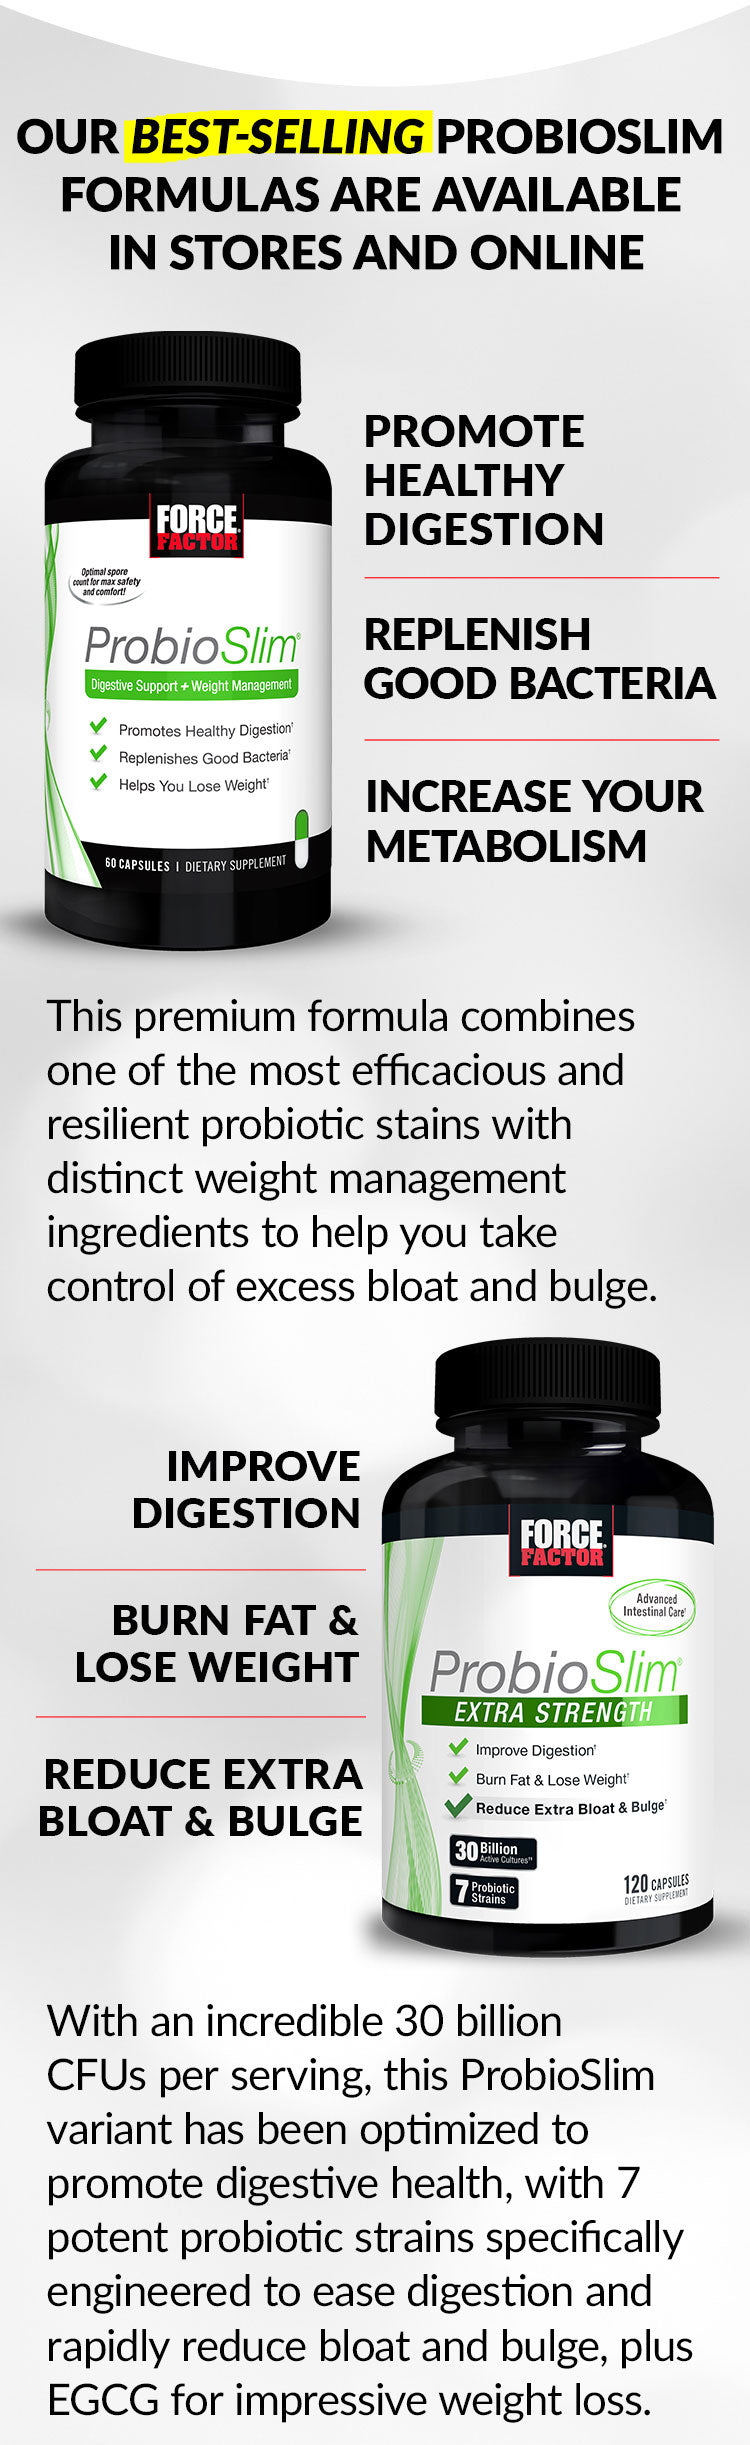 OUR BEST-SELLING PROBIOSLIM FORMULAS ARE AVAILABLE IN STORES AND ONLINE. Promote Healthy Digestion, Replenish Good Bacteria, Increase Your Metabolism. This premium formula combines one of the most efficacious and resilient probiotic stains with distinct weight management ingredients to help you take control of excess bloat and bulge. Improve Digestion, Burn Fat & Lose Weight, Reduce Extra Bloat and Bulge. With an incredible 30 billion CFUs per serving, this ProbioSlim variant has been optimized to promote digestive health, with 7 potent probiotic strains specifically engineered to ease digestion and rapidly reduce bloat and bulge, plus EGCG for impressive weight loss.